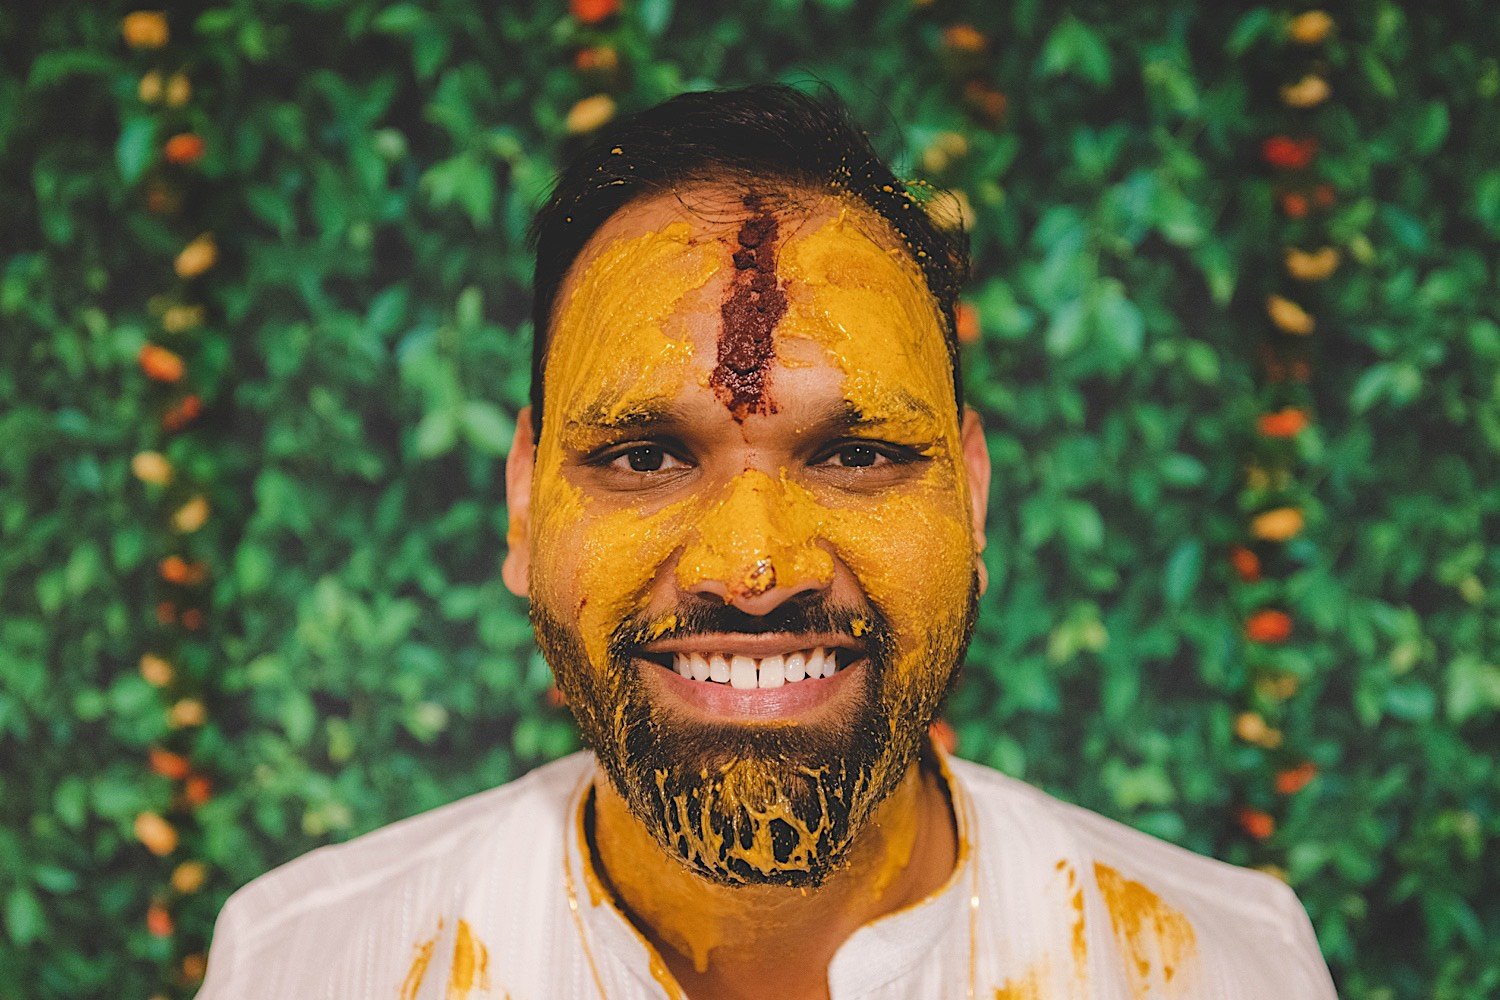 Groom smiles at camera covered in turmeric at traditional Haldi celebration